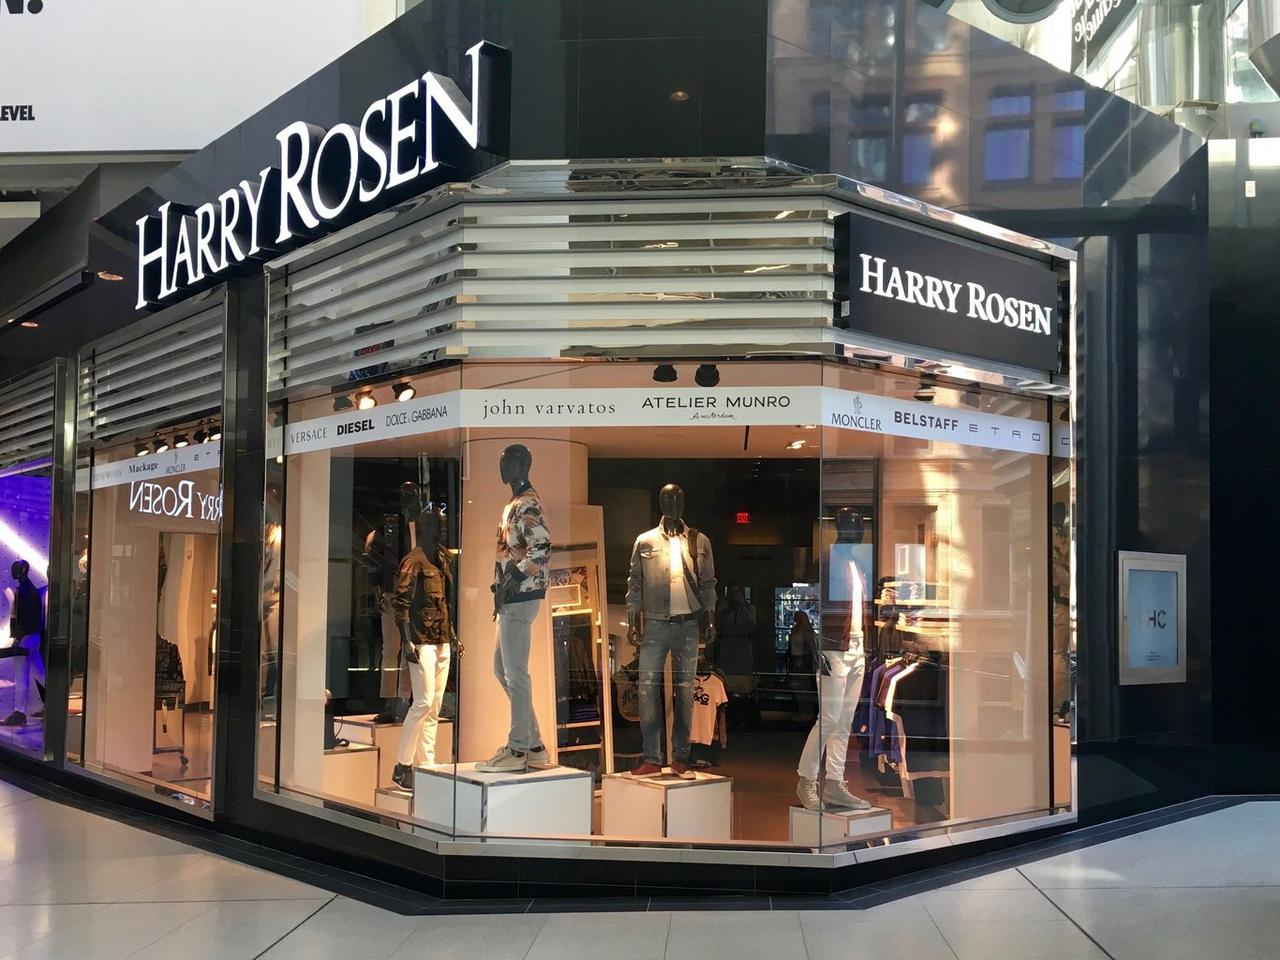 CF Toronto Eaton Centre - Teeming with Trendy Styles – Go Guides